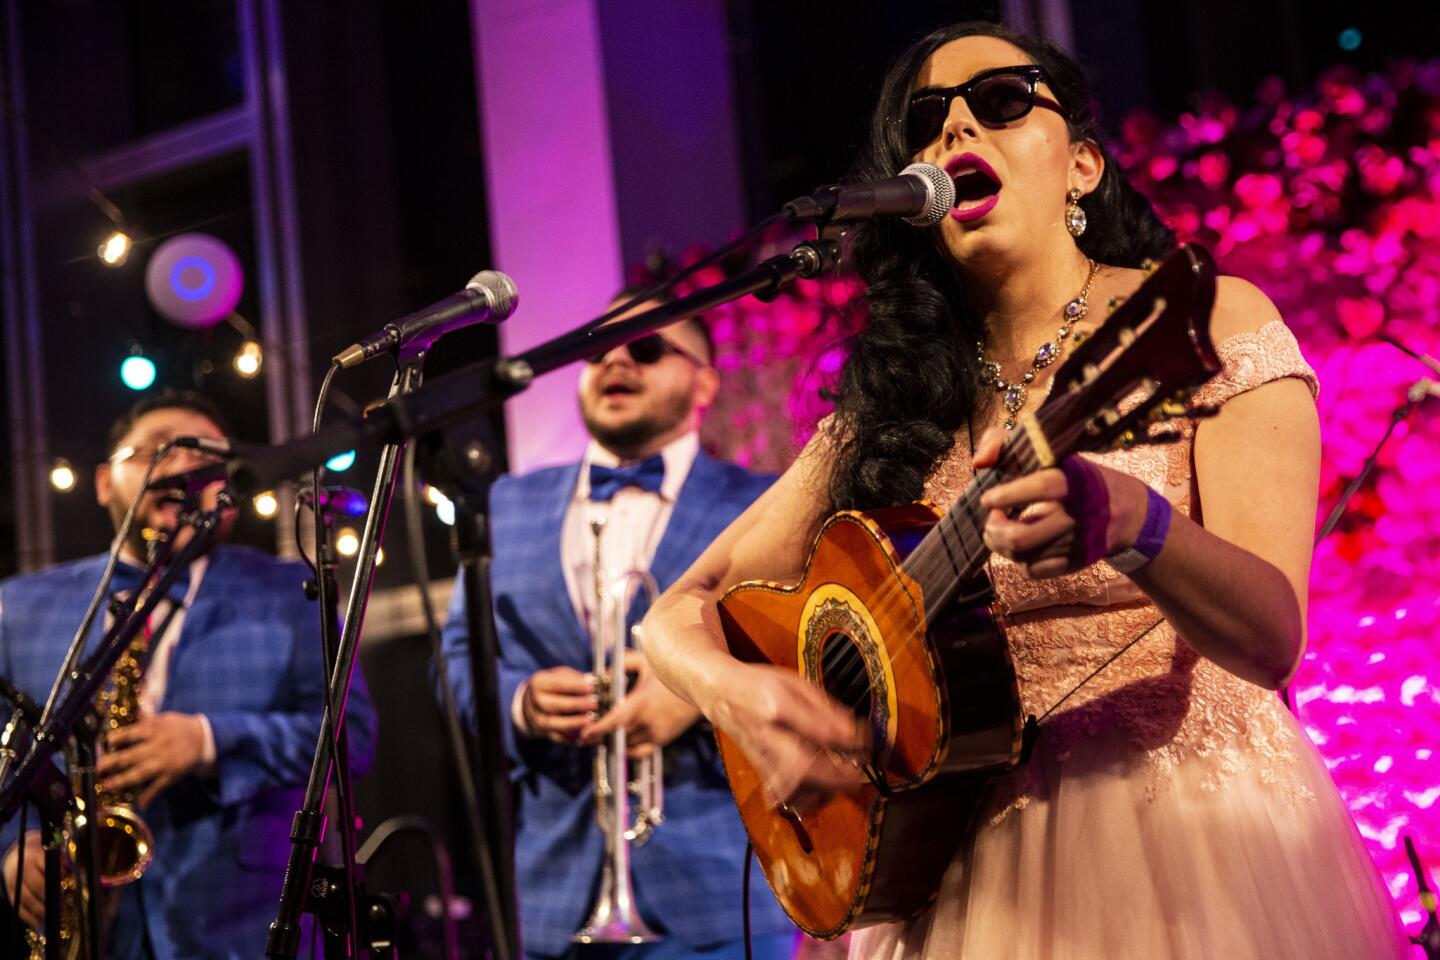 Nancy Sanchez, right, performs at Sleepless: The Music Center After Hours' "Quinceañera Reimagined" at the Dorothy Chandler Pavilion on Feb. 10, 2019, in Los Angeles.